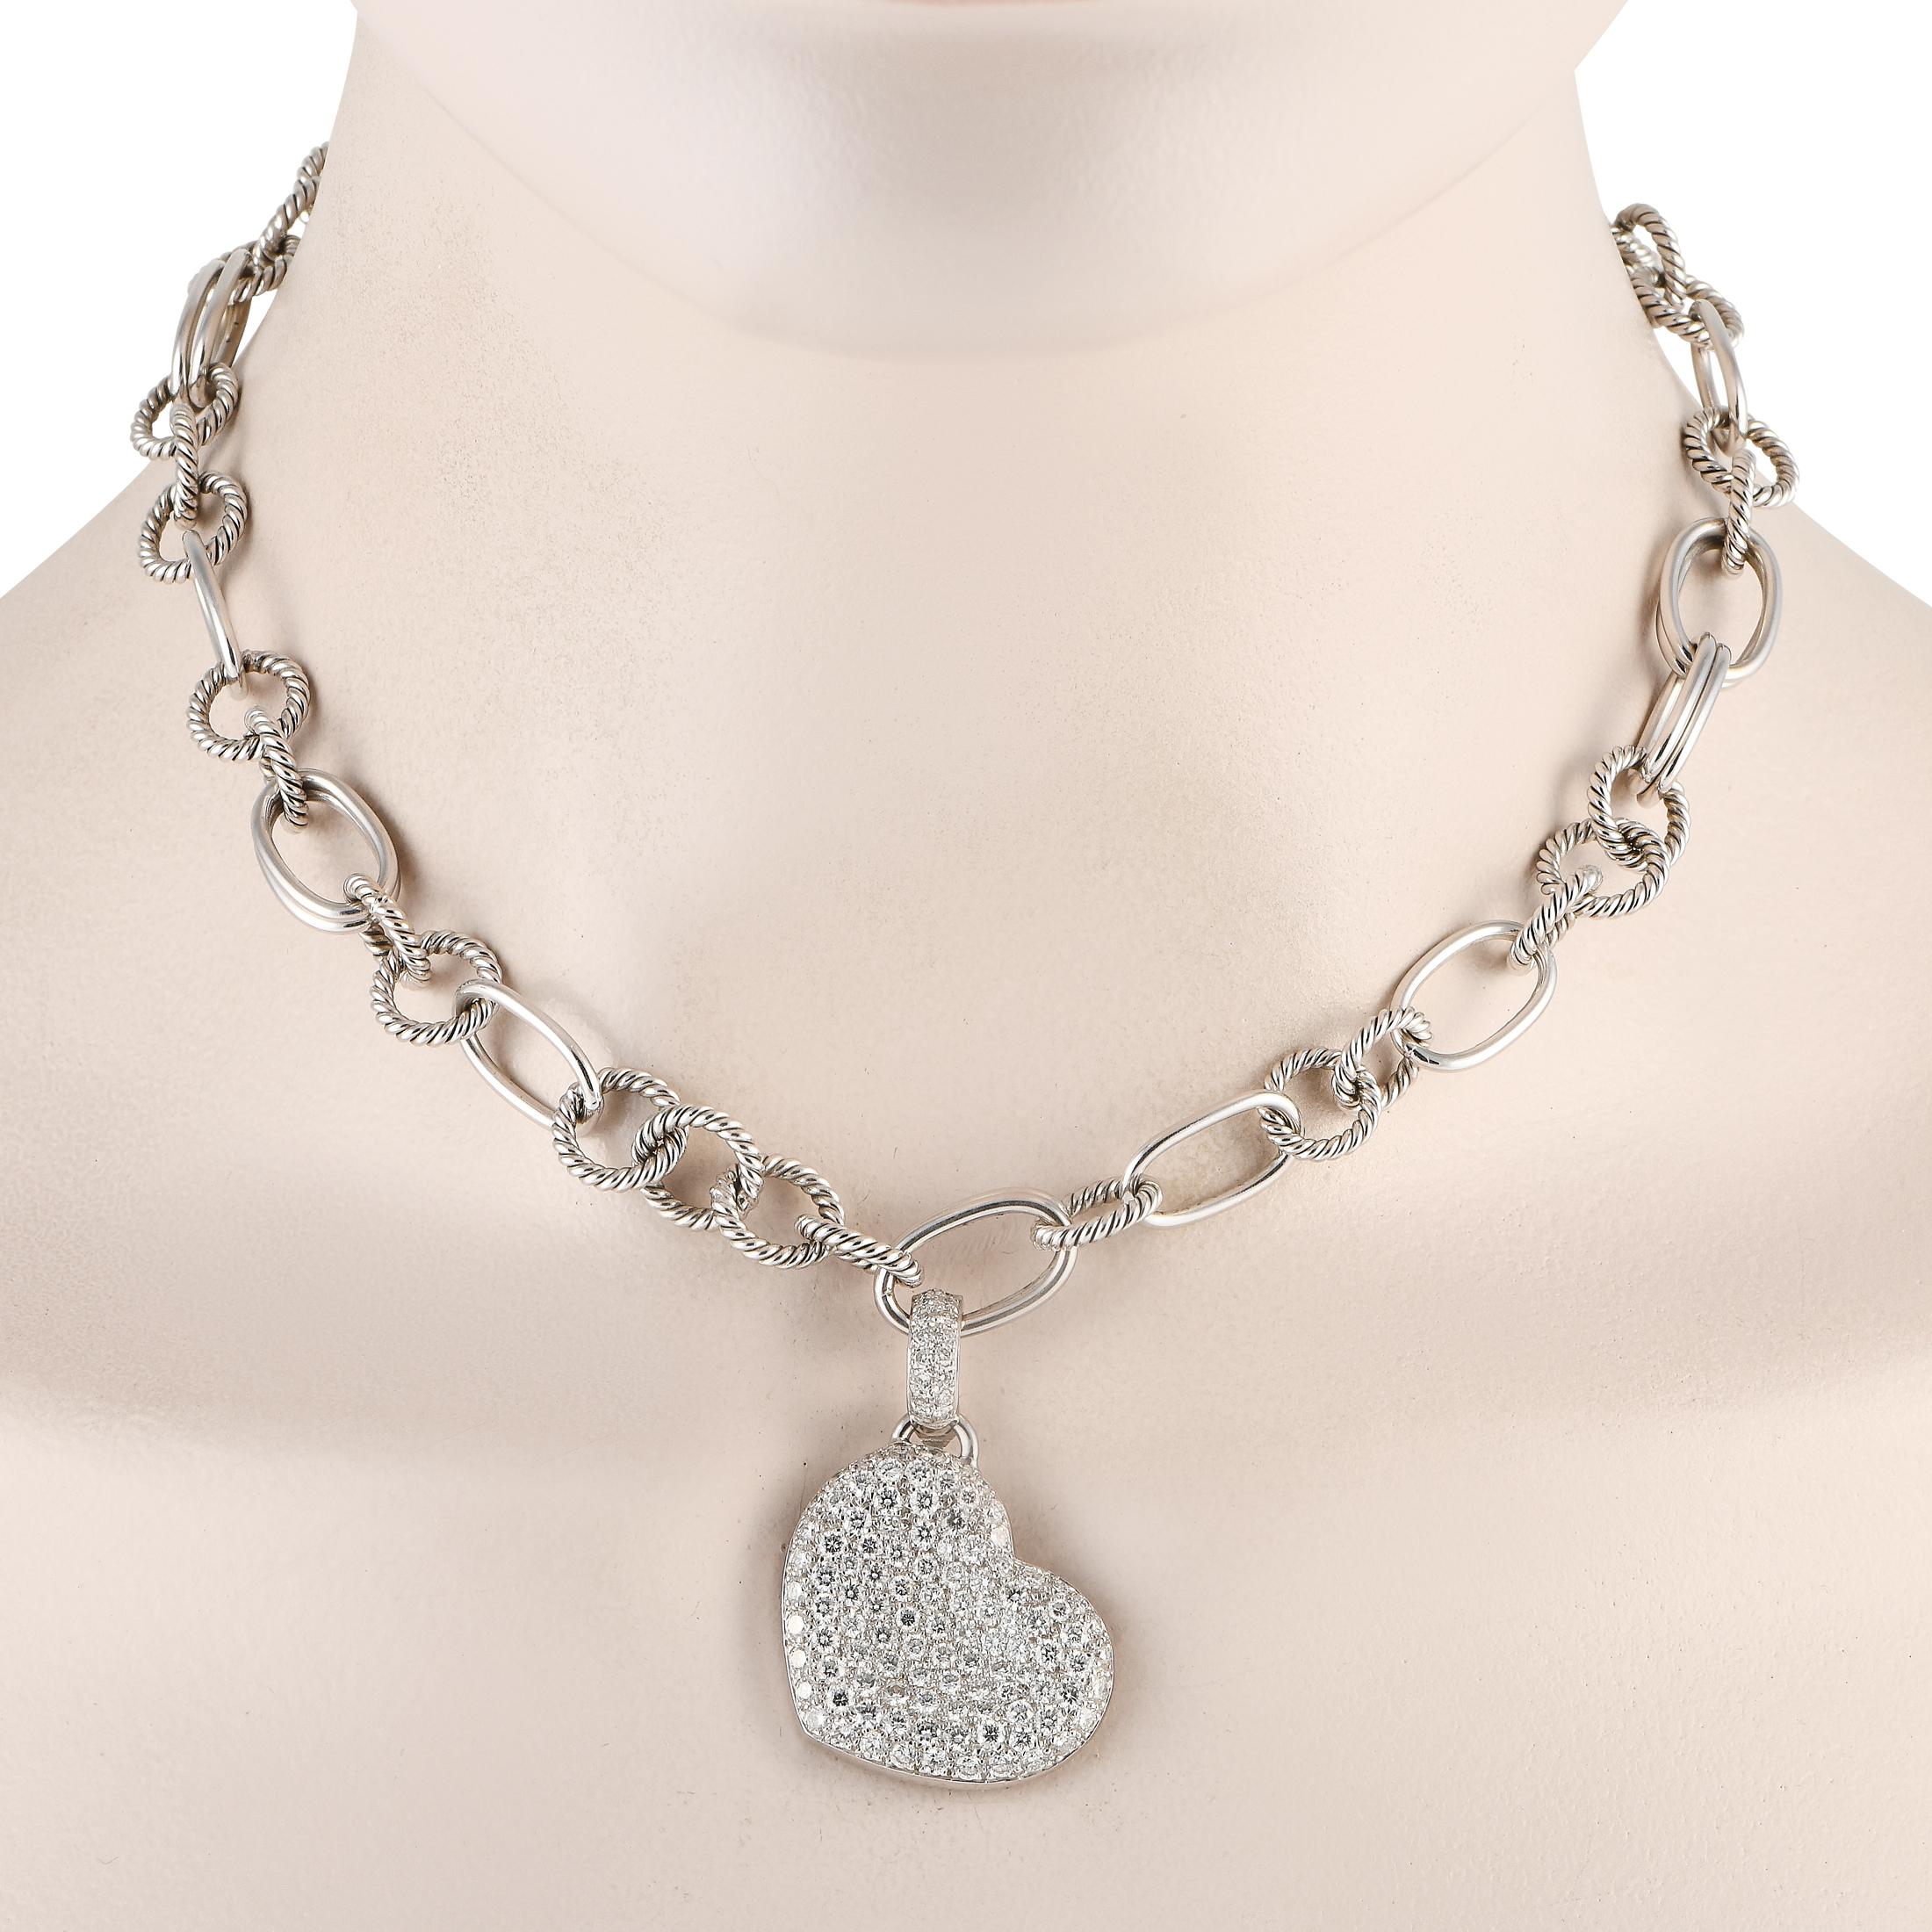 A dynamic chain measuring 17” long makes this 18K White Gold necklace uniquely elegant. Suspended at the center, a heart-shaped pendant measuring 1.5” long and 0.5” wide sparkles to life thanks to diamonds with a total weight of approximately 5.0